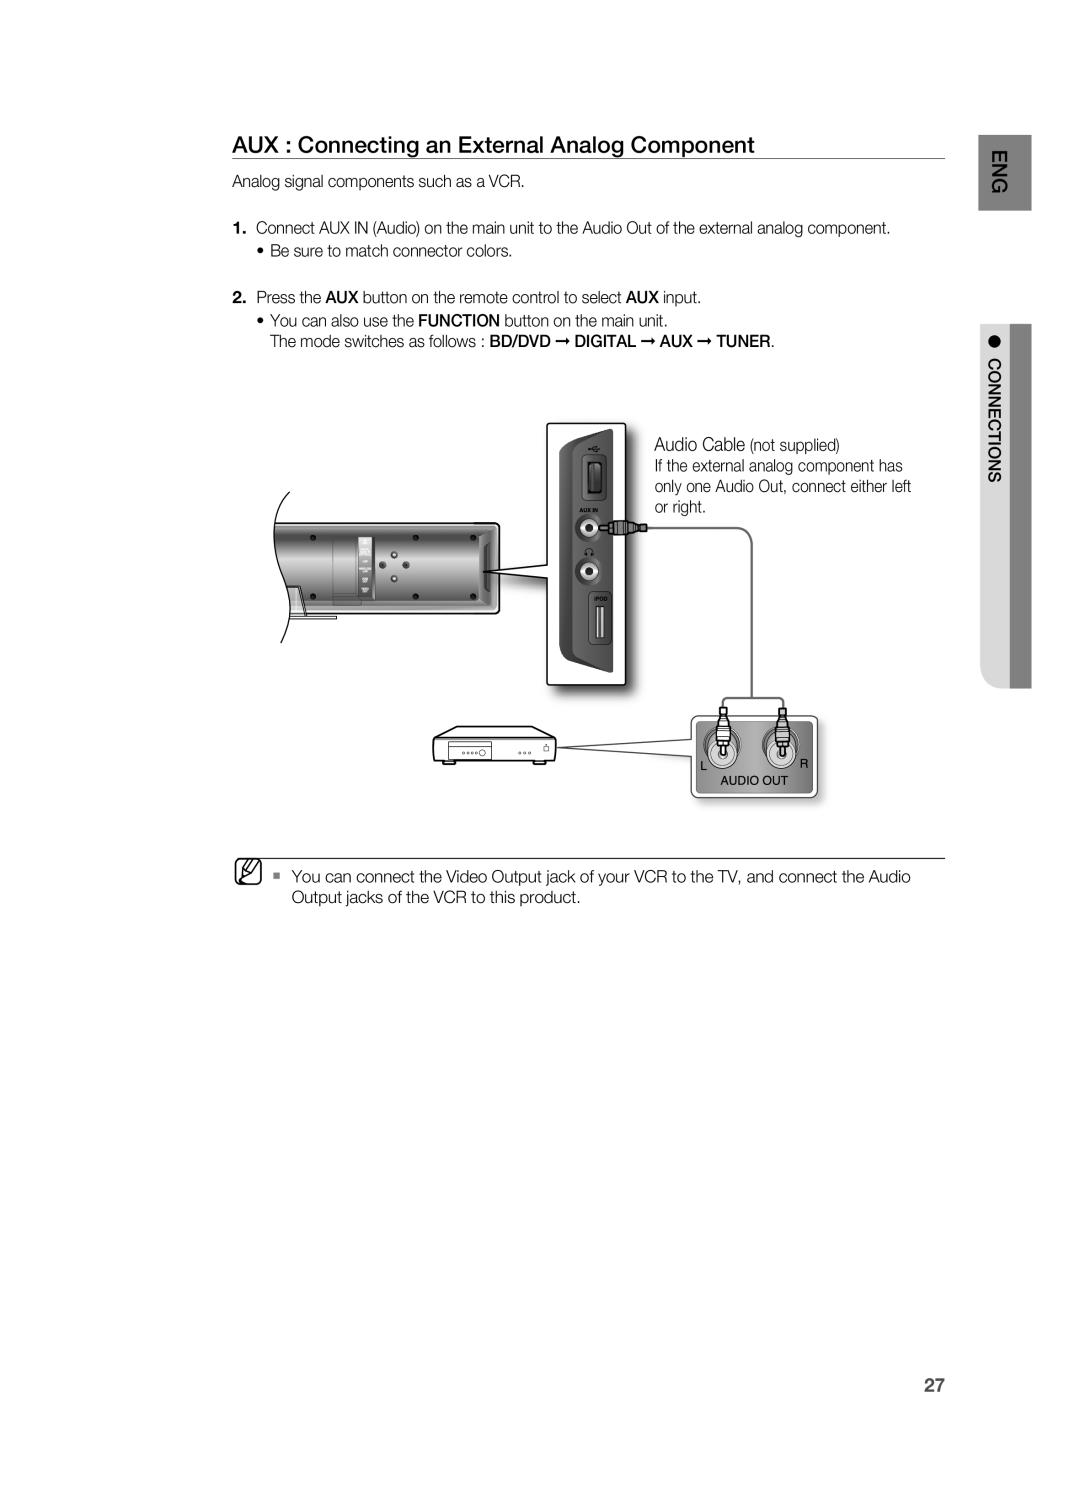 Samsung HT-BD8200 user manual AUX : Connecting an External Analog Component 